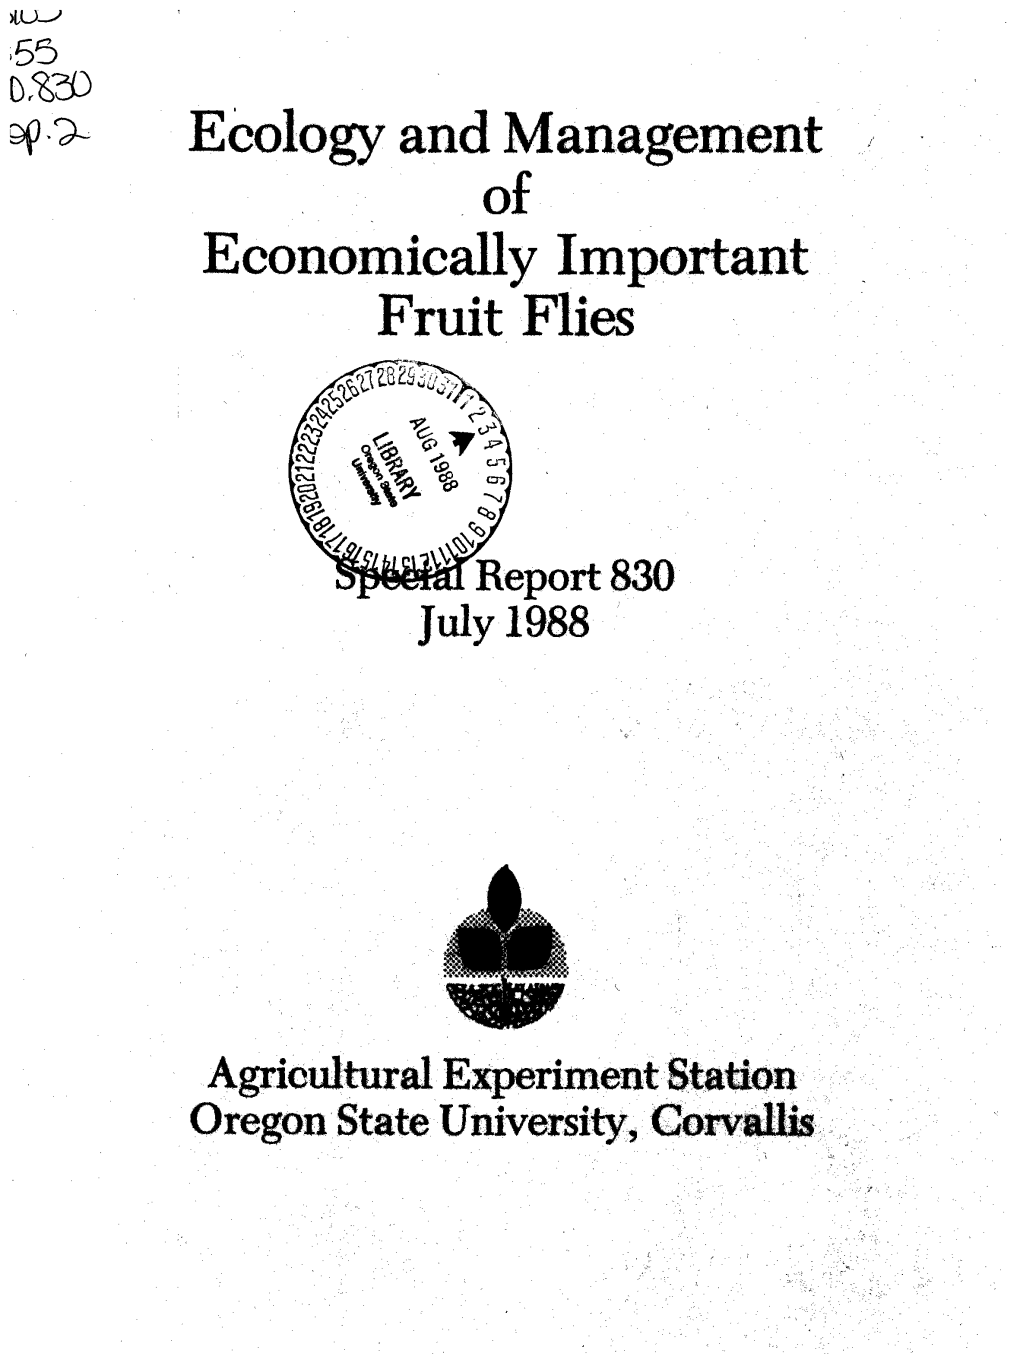 Ecology and Management of Economically Important Fruit Flies